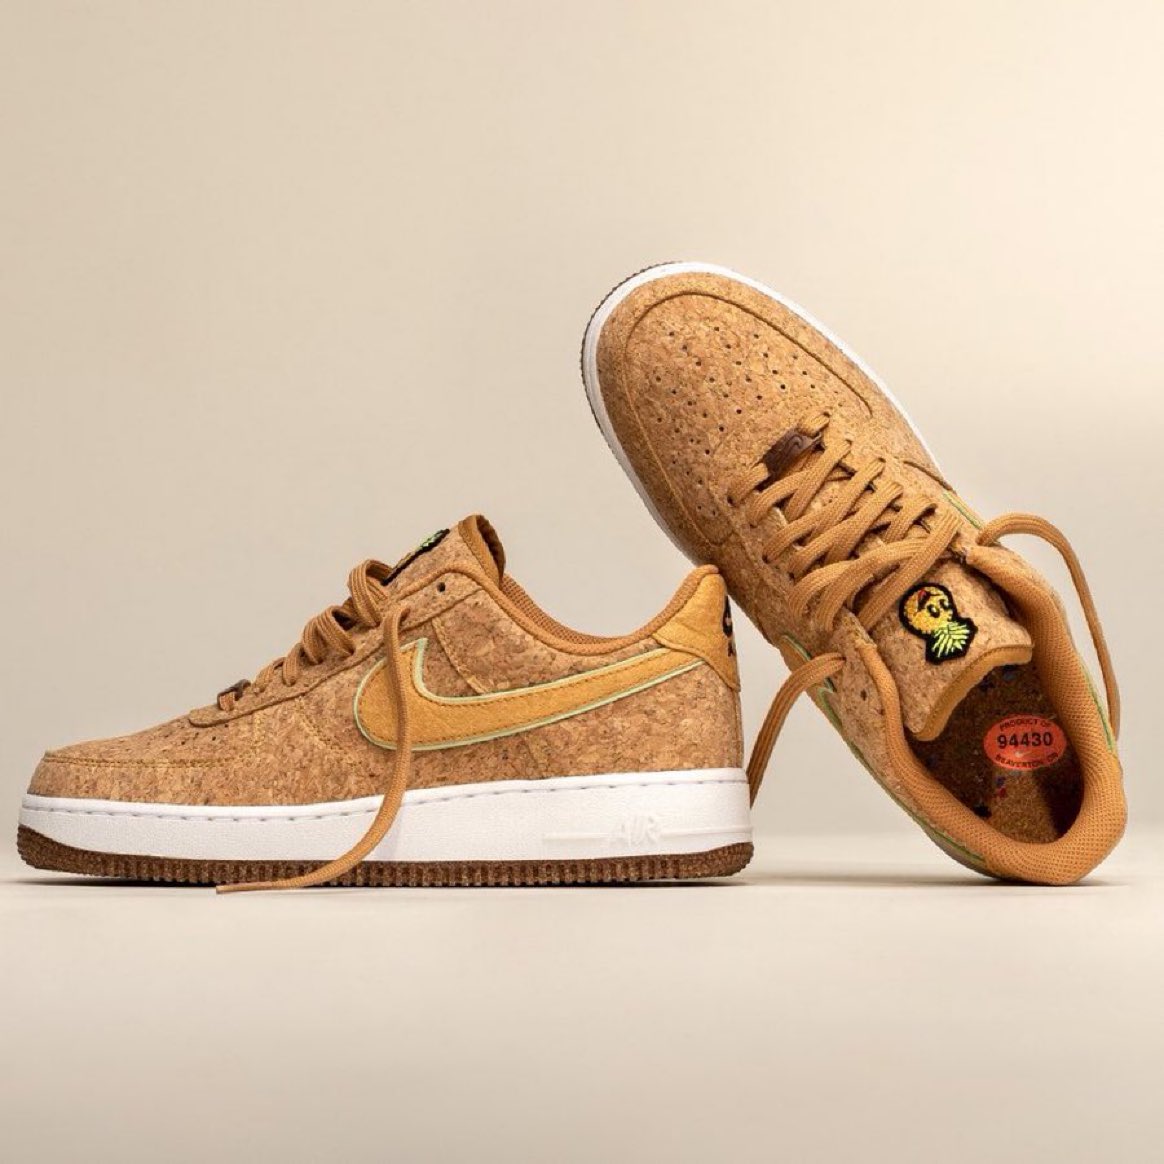 SNKR_TWITR on X: "Nike Air Force 1 '07 Premium Cork 'Happy Pineapple' still  available https://t.co/BPrSypOX17 #AD https://t.co/yWRNpbHnw3" / X